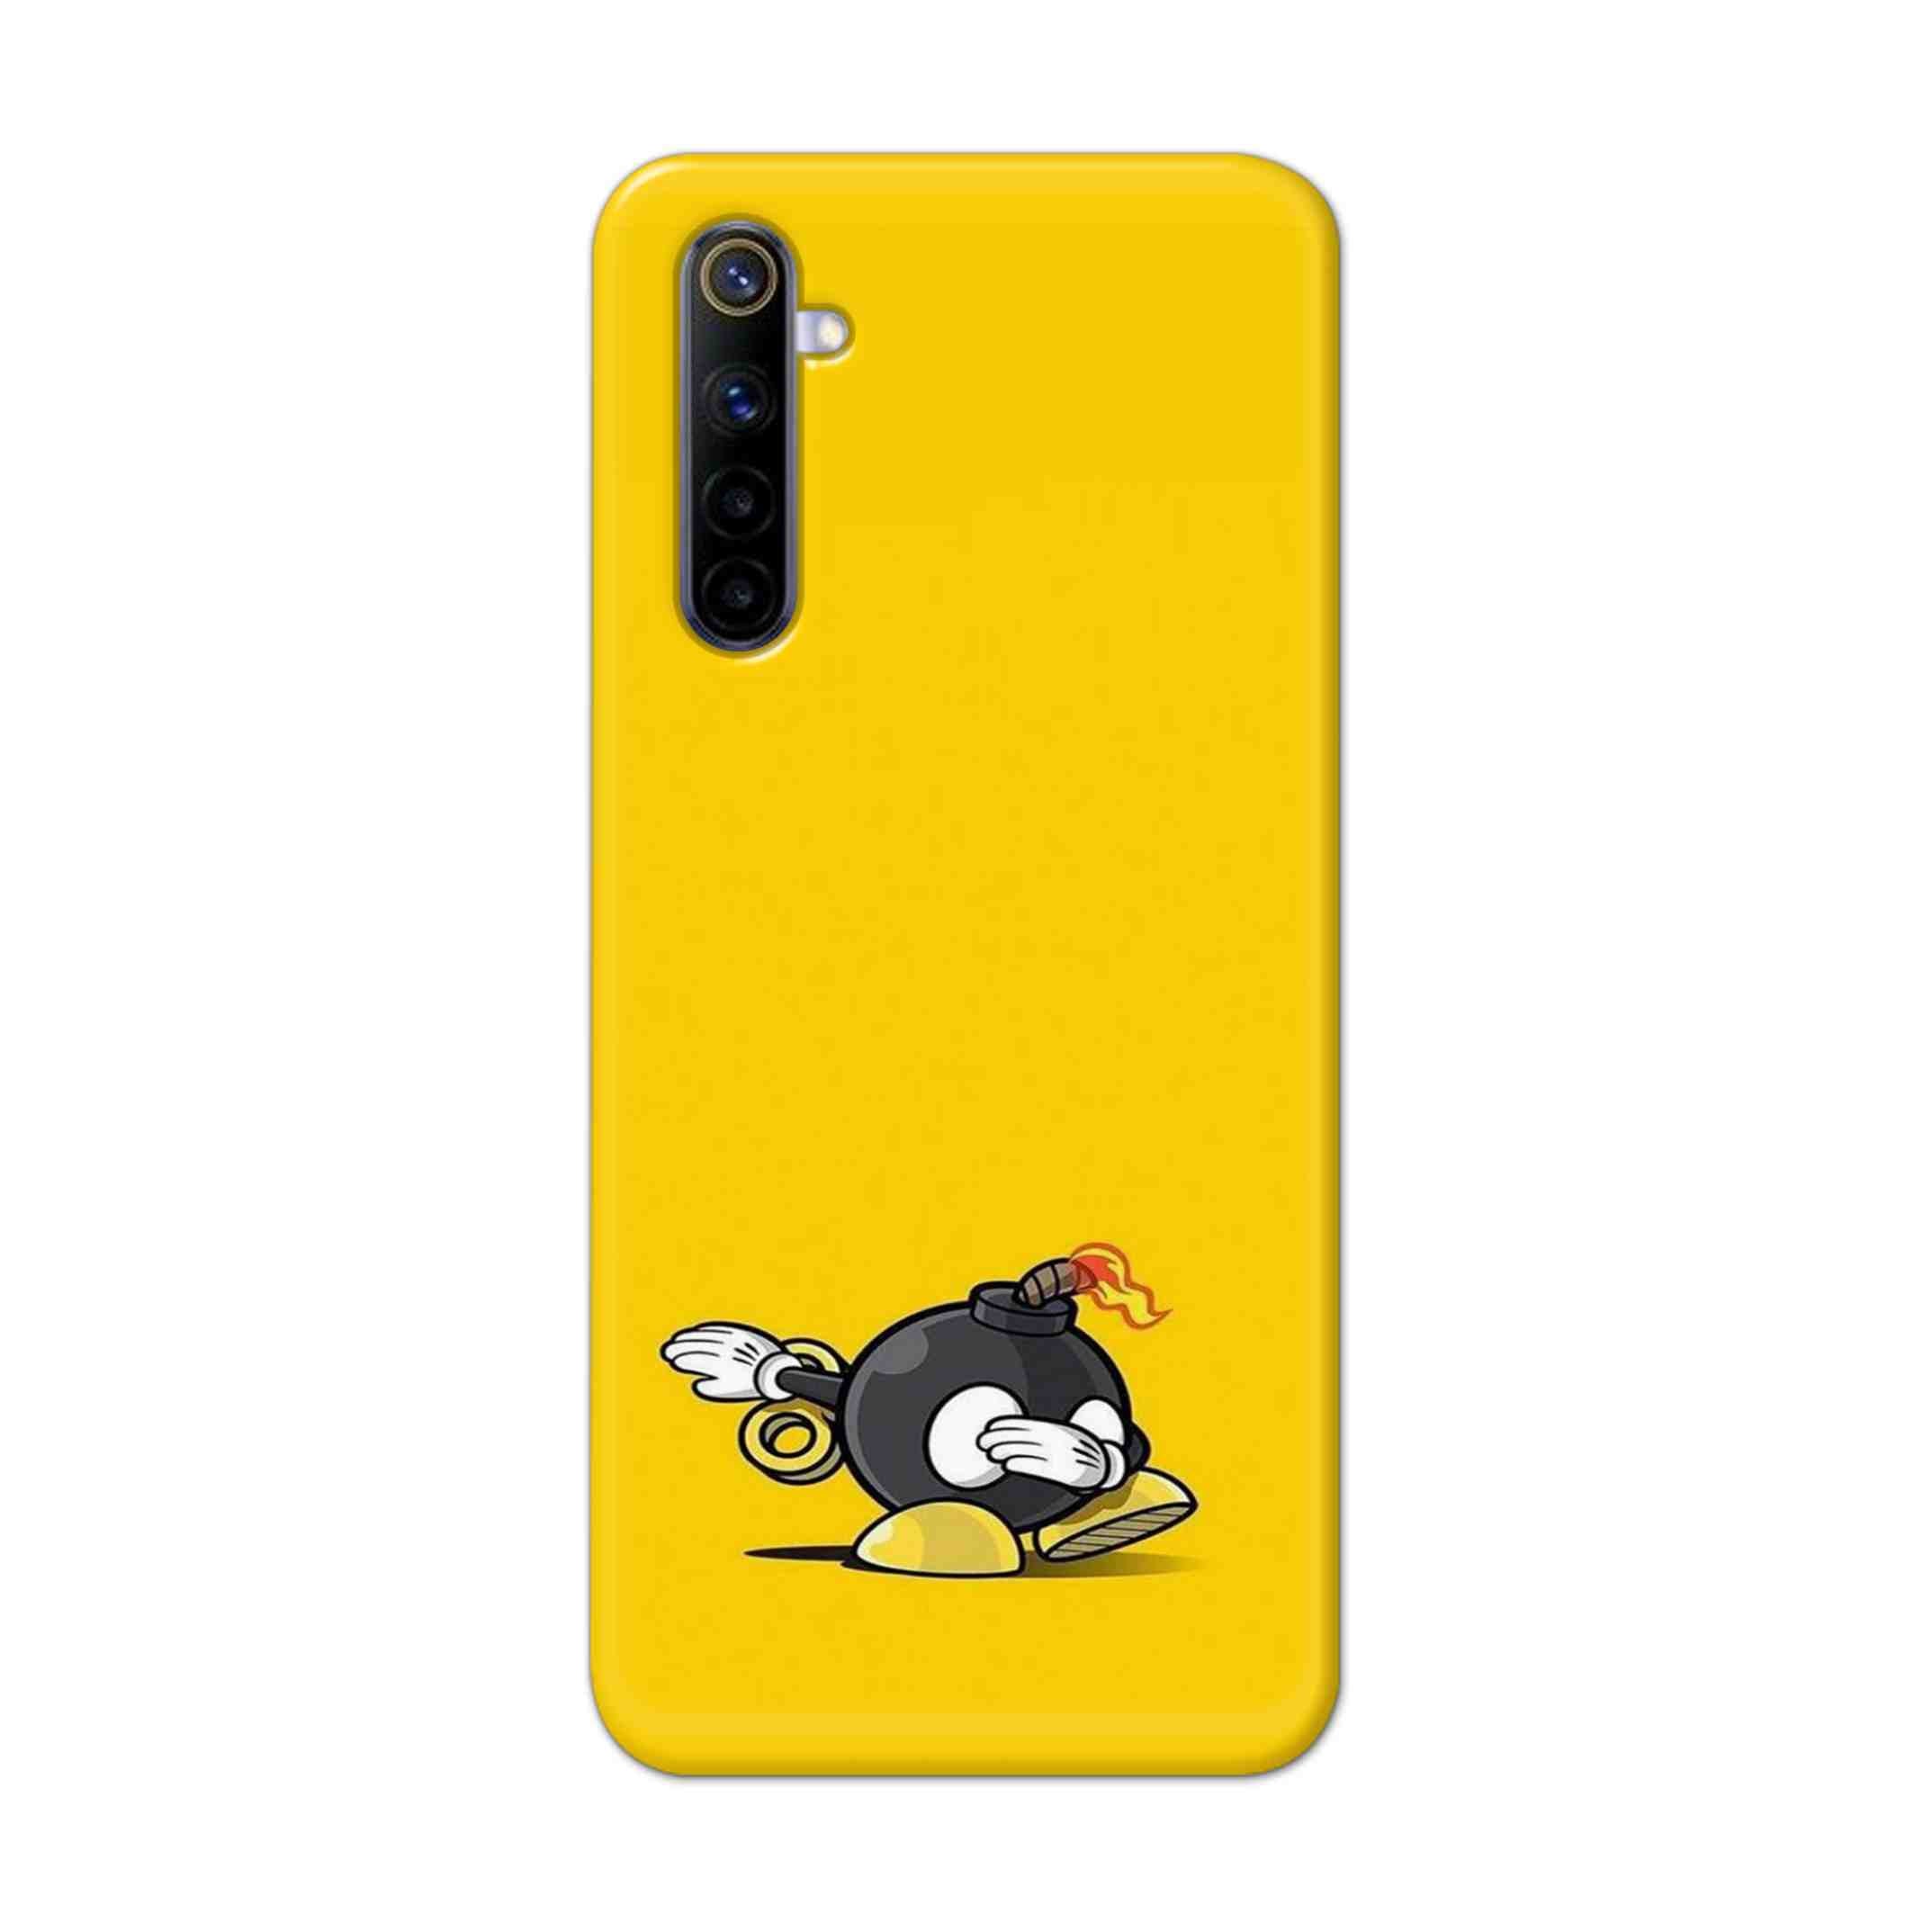 Buy Dashing Bomb Hard Back Mobile Phone Case Cover For REALME 6 PRO Online